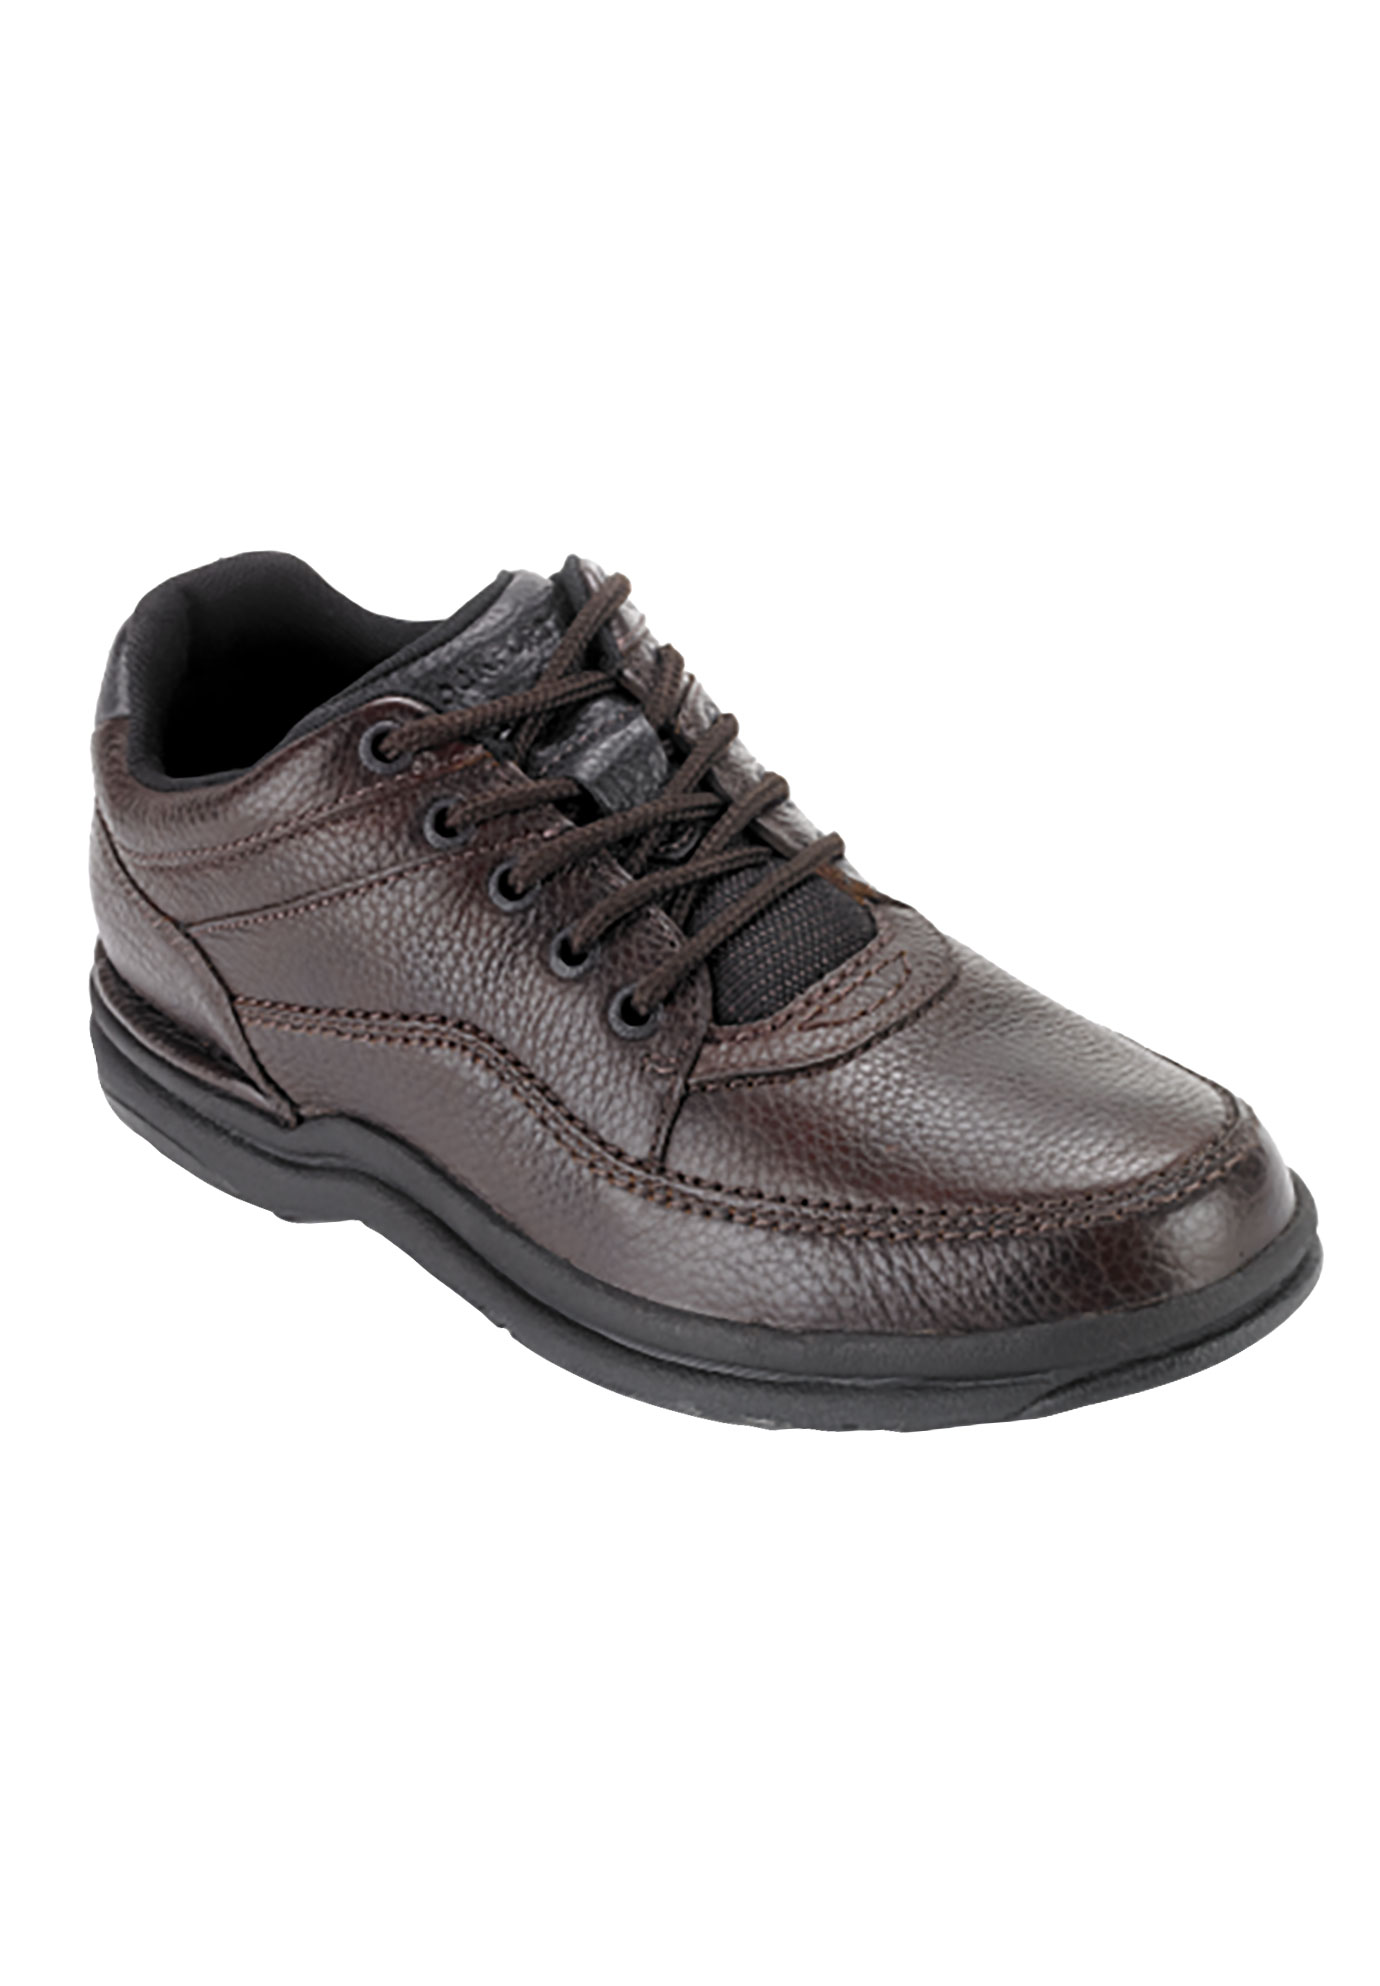 World Tour Classic Walking Shoe by Rockport®| Big and Tall Shoes ...